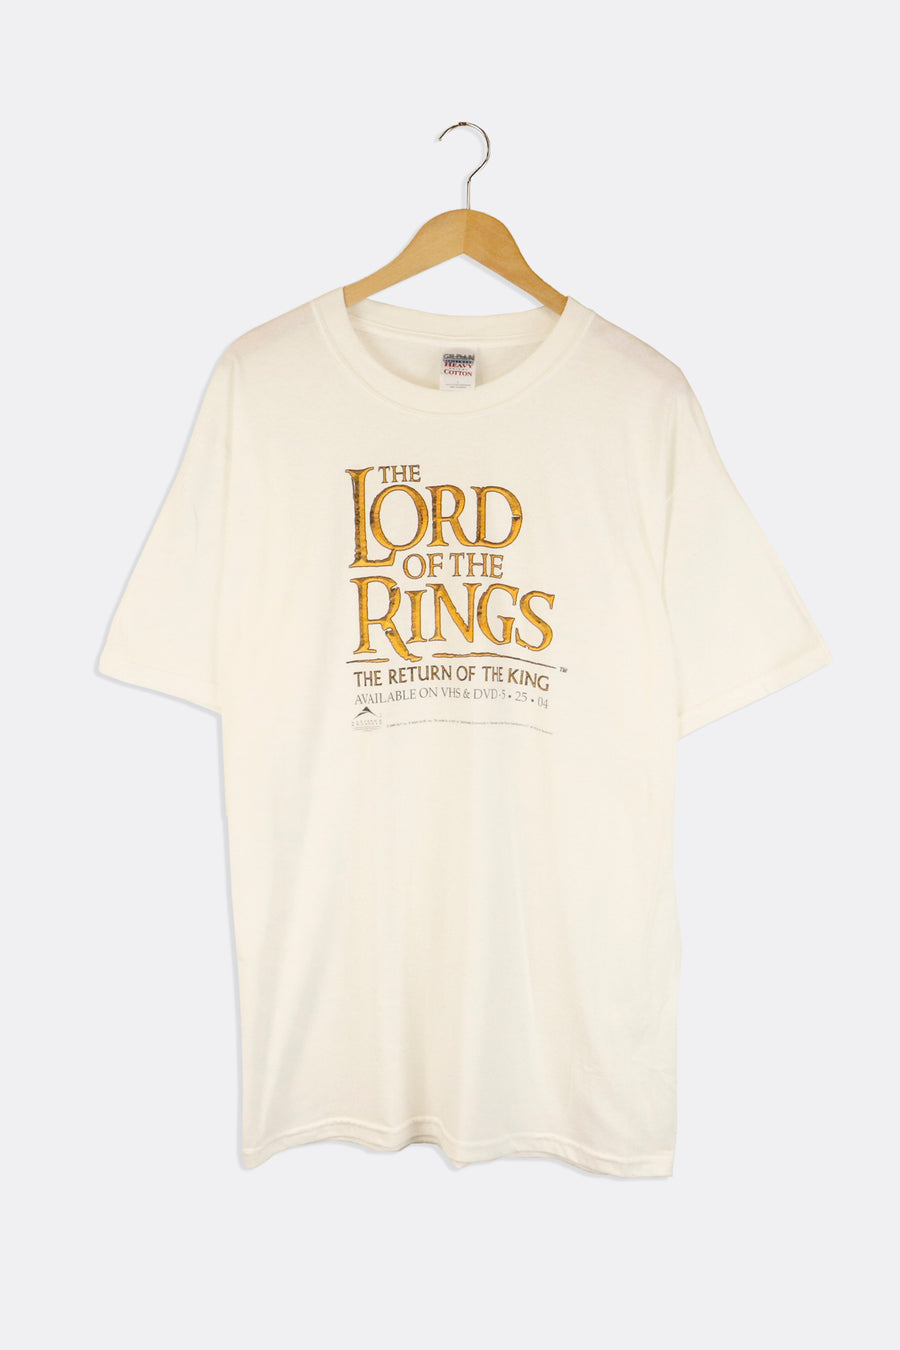 Vintage 2004 The Lord Of The Rings Return Of The King On VHS And DVD Vinyl T Shirt Sz L